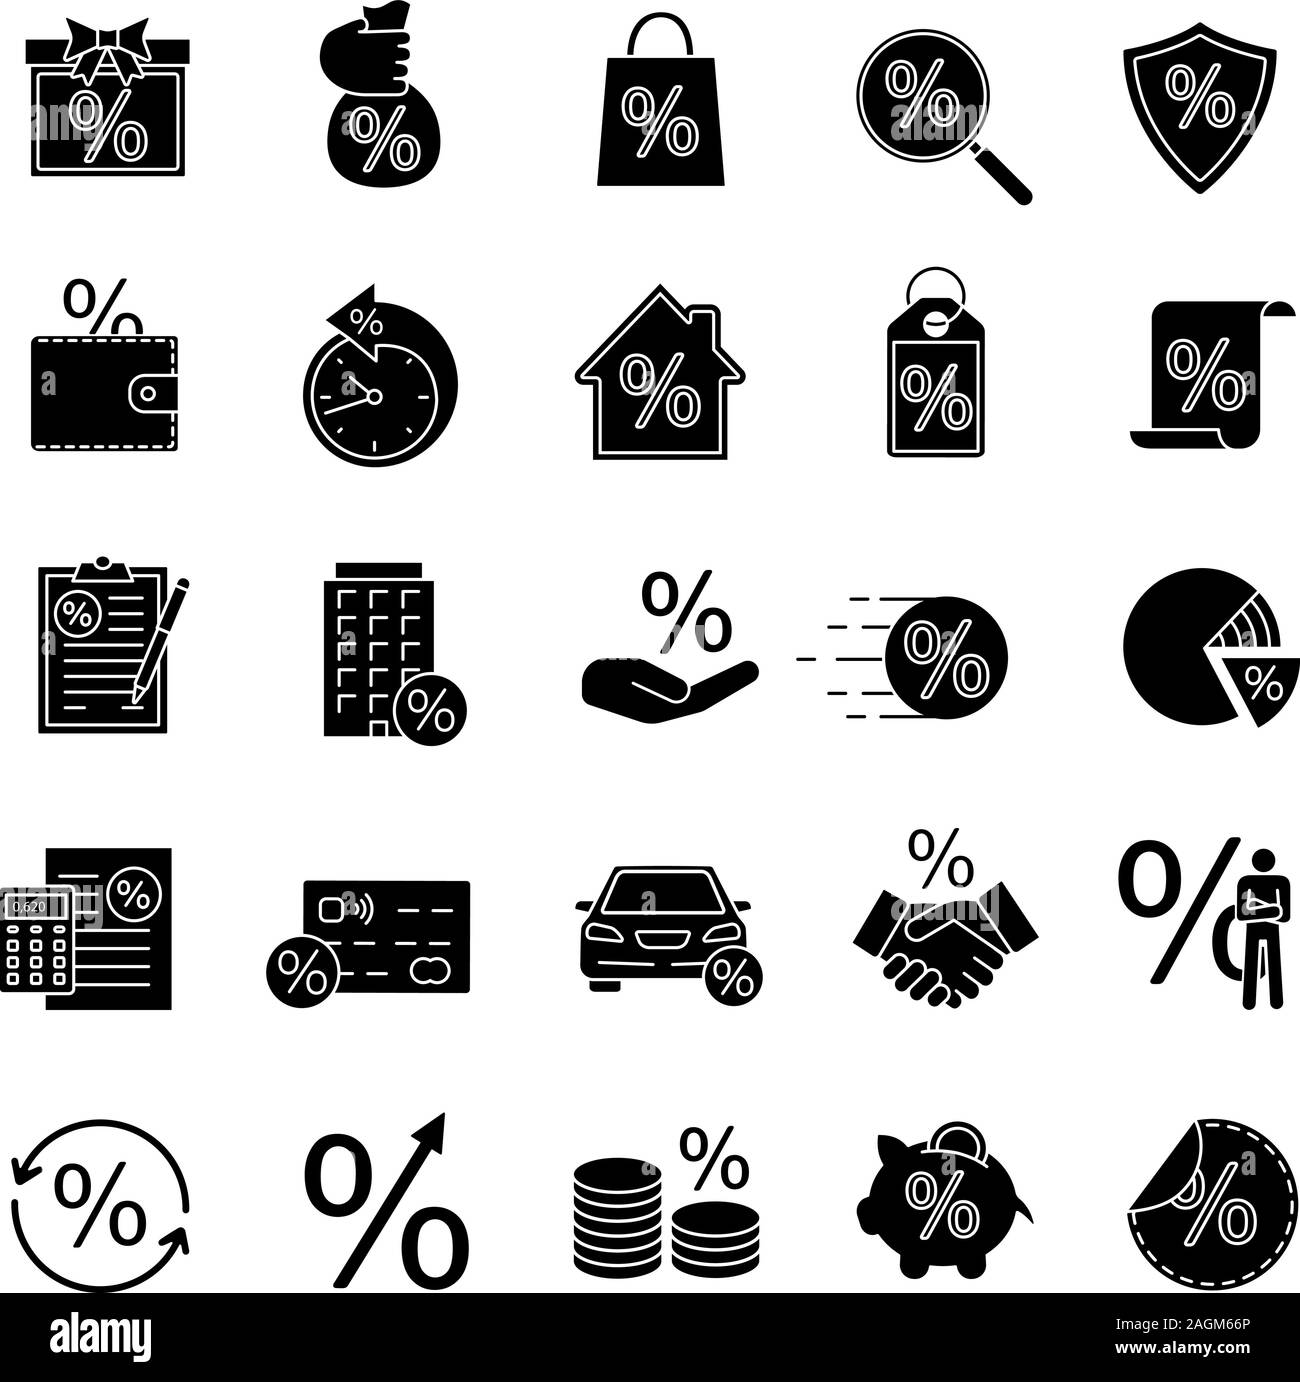 Percents glyph icons set. Discount offers, real estate mortgages, banking, saving money. Silhouette symbols. Vector isolated illustration Stock Vector